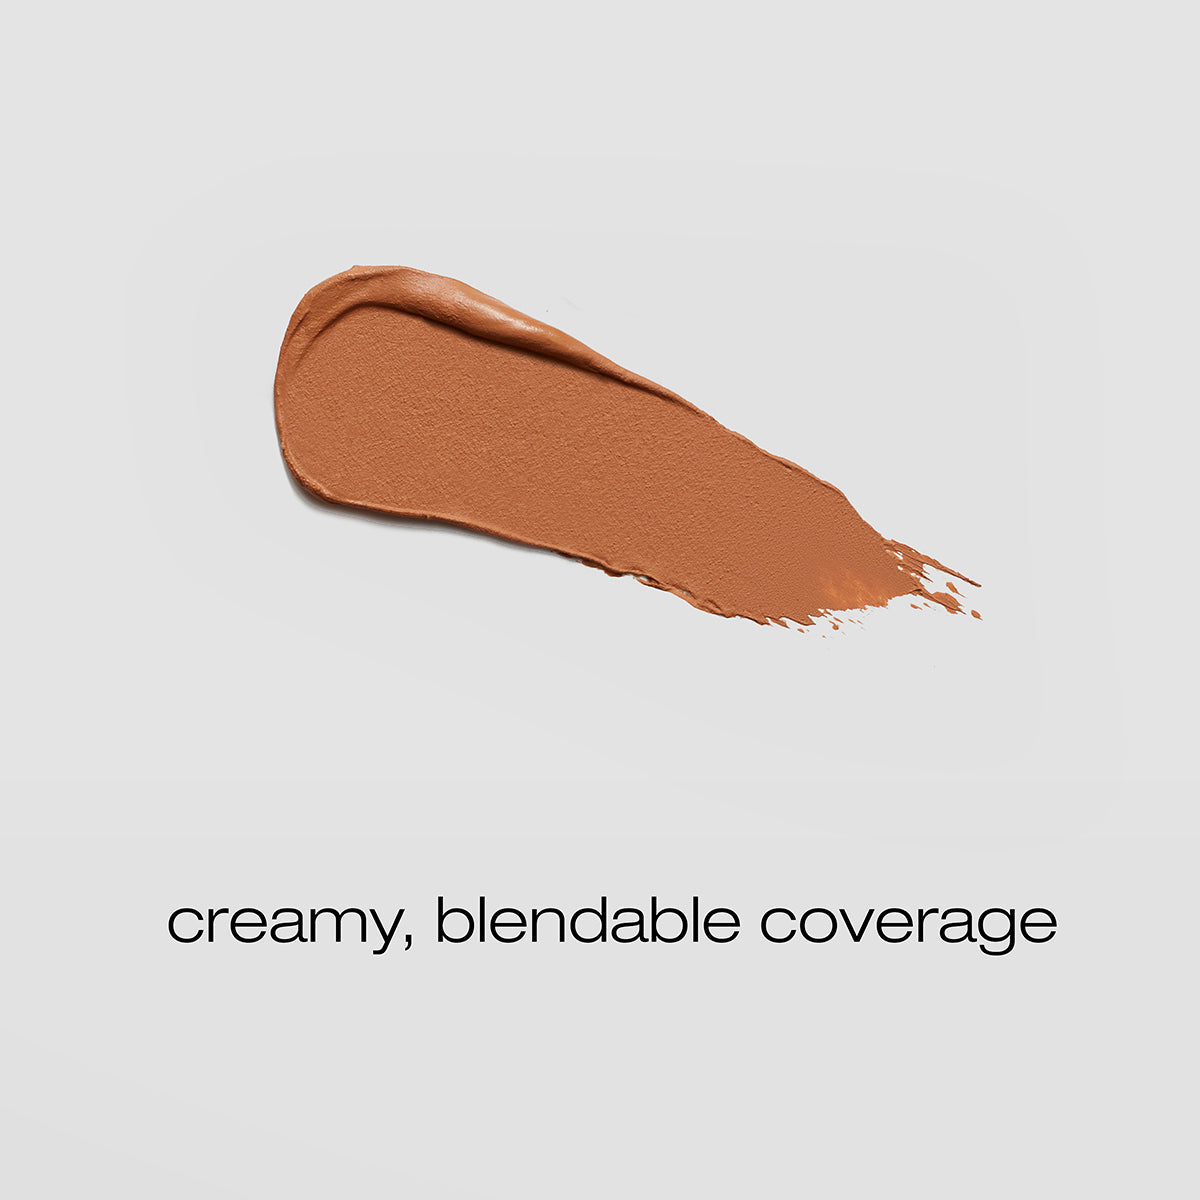 Spread of the Butter Pecan concealer with description of creamy, blendable coverage